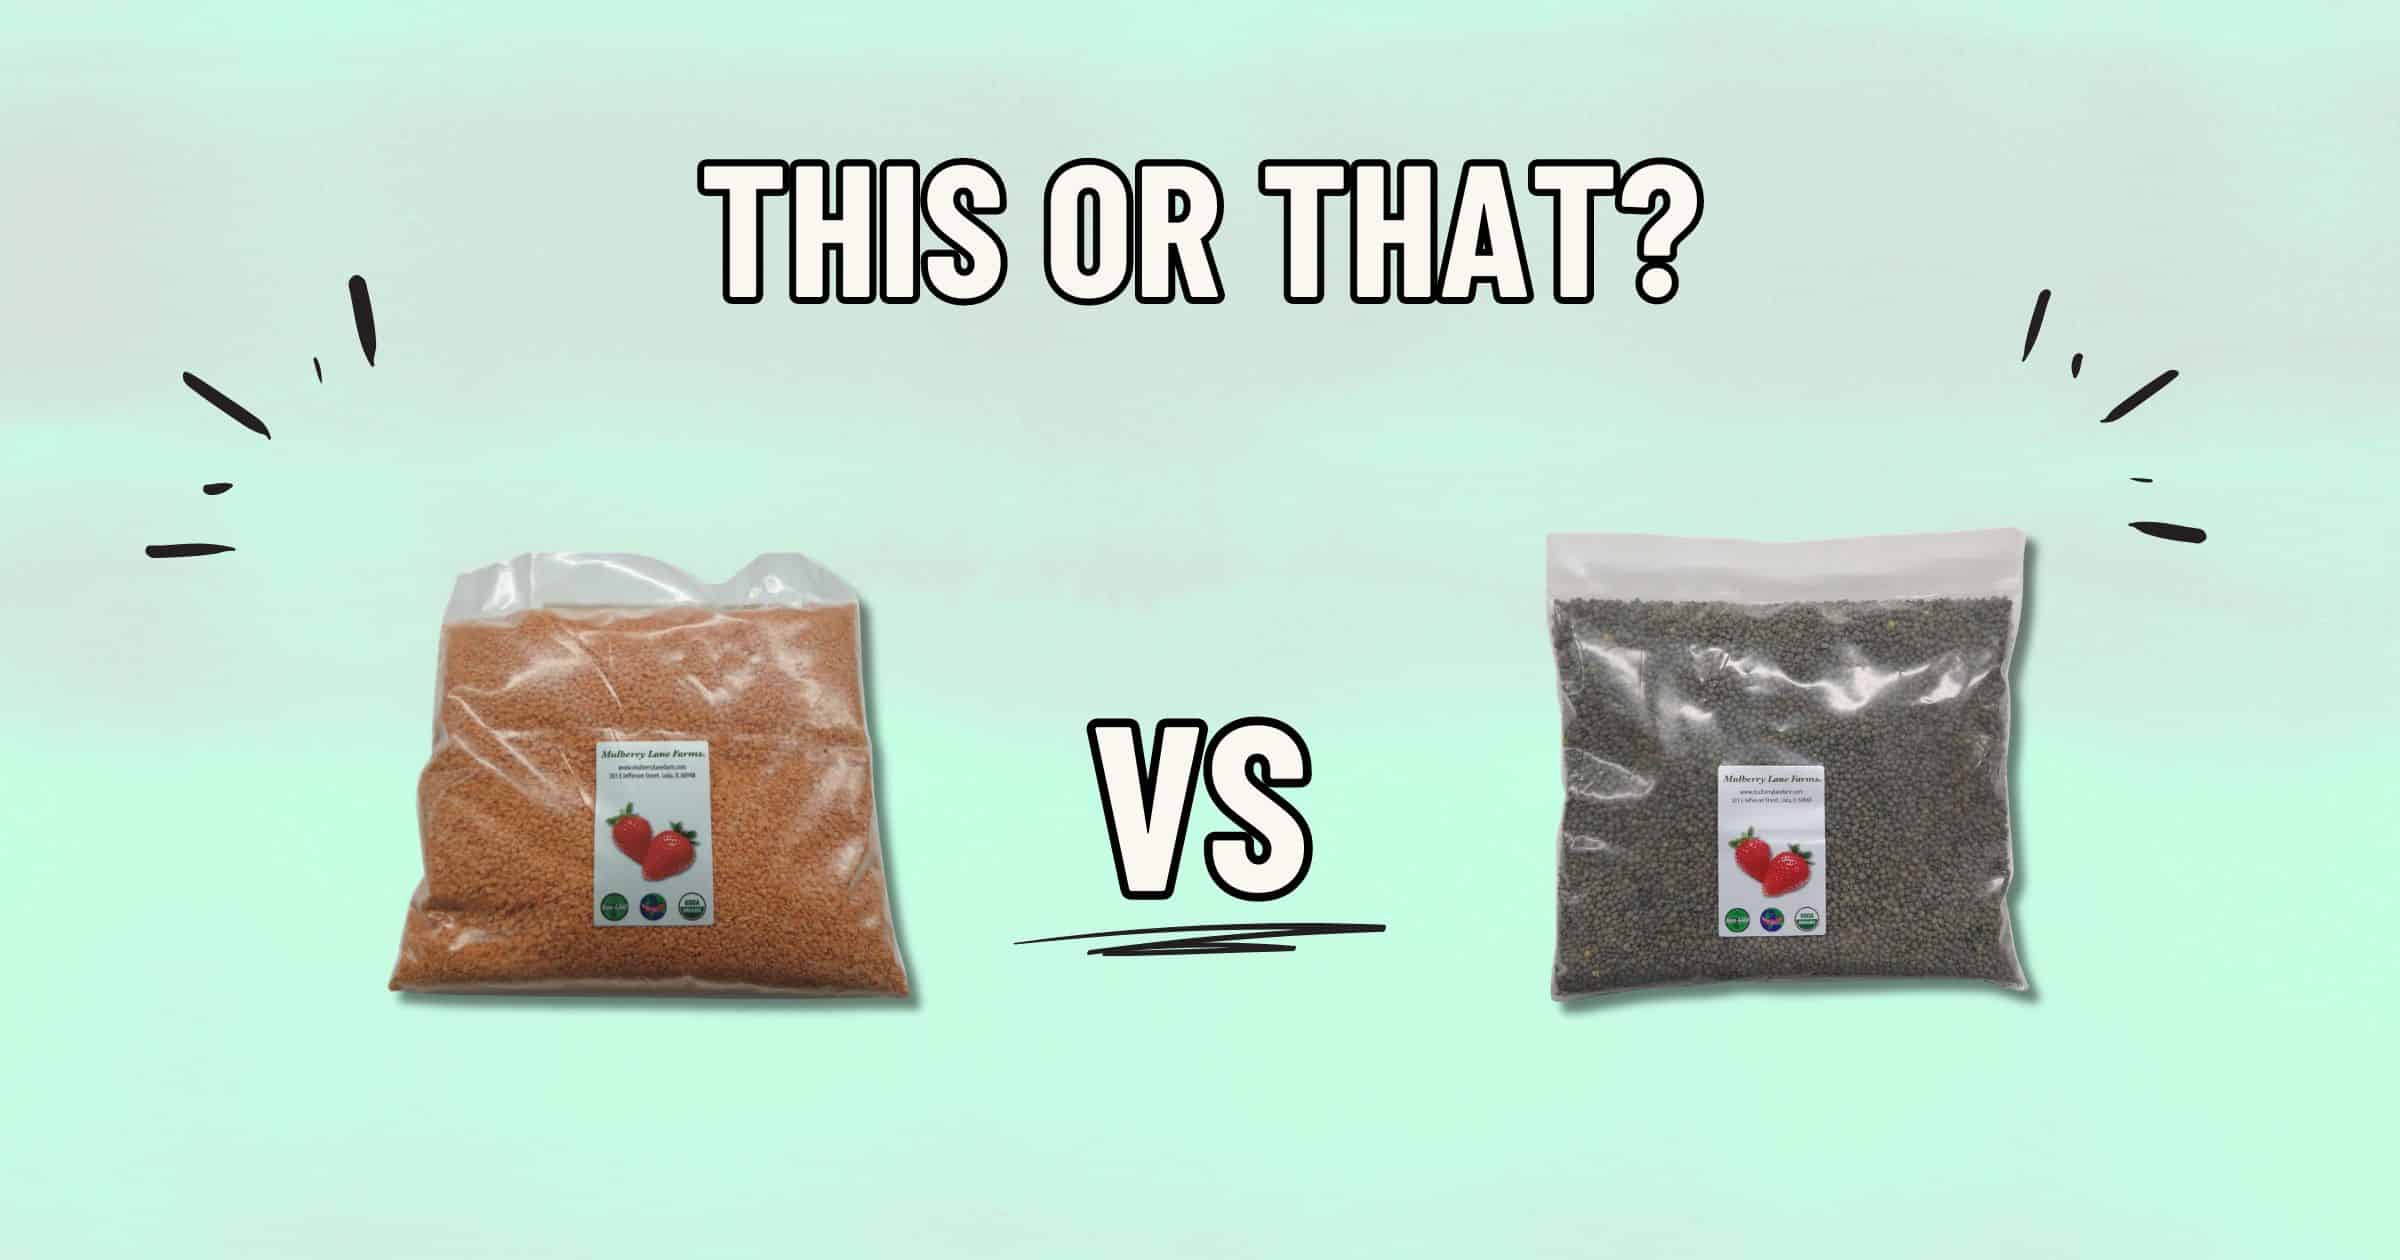 An image depicting two bags of lentils side by side with the text "THIS OR THAT?" above them and "VS" between them. The bag on the left contains red lentils, while the bag on the right contains green lentils.